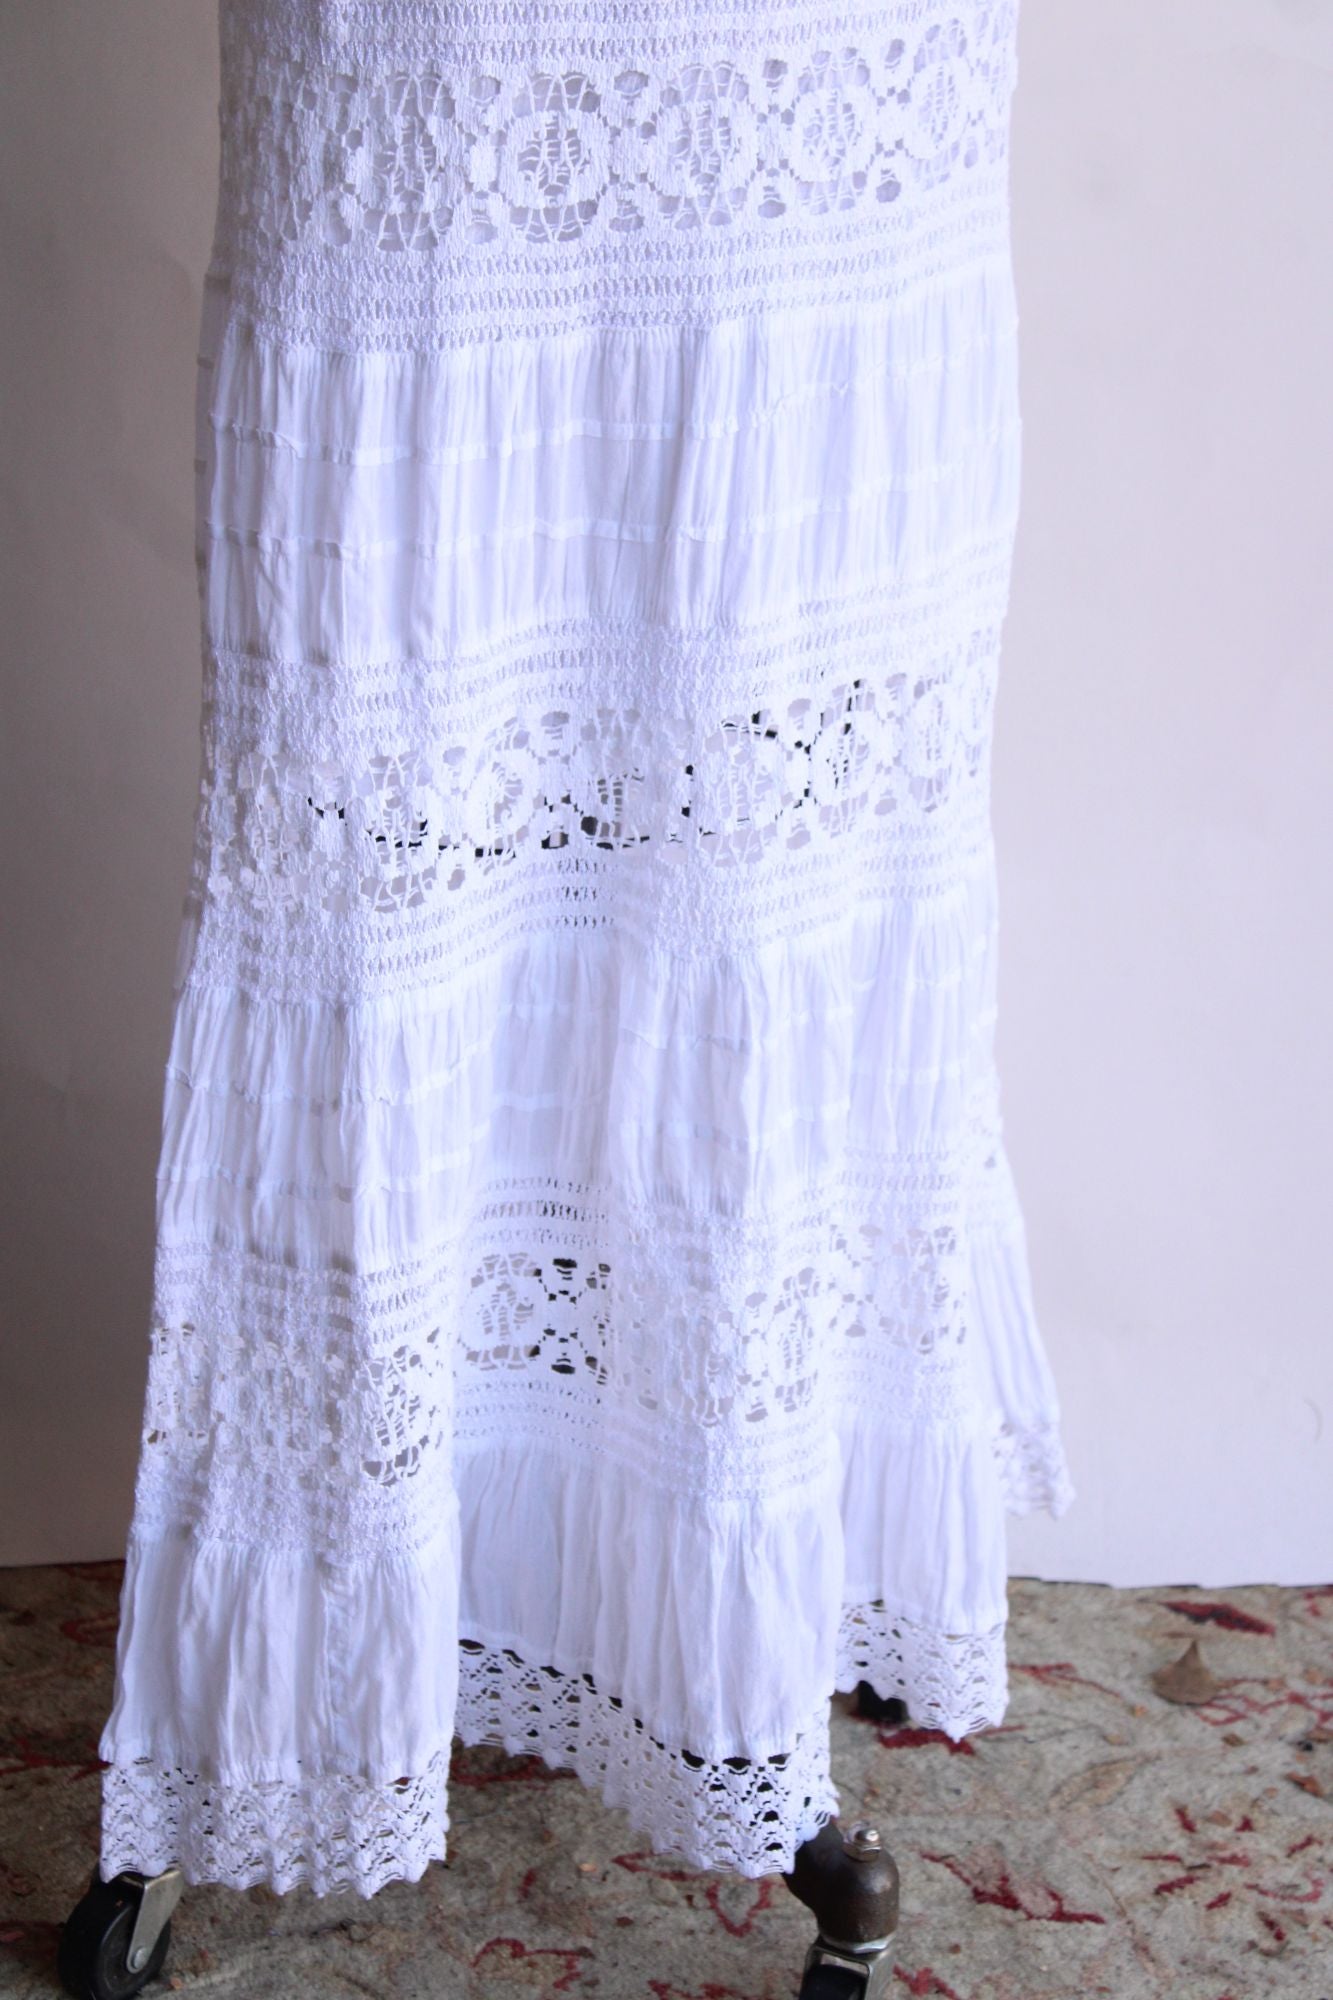 Cute Options Womens Maxi Dress, White Cotton and Lace, Size S/M